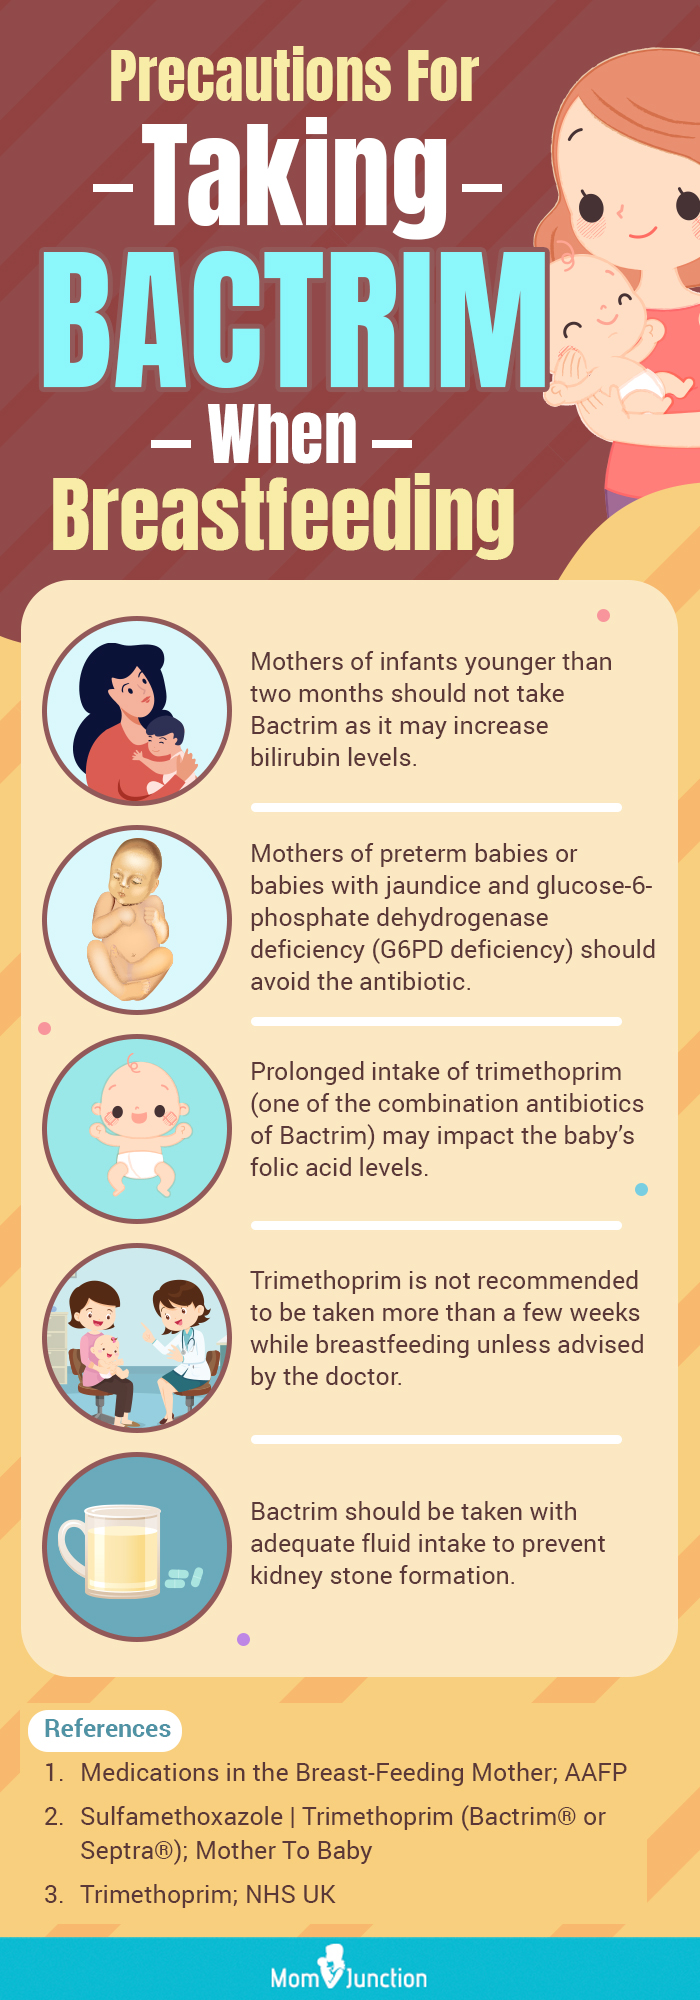 precautions for taking bactrim when breastfeeding (infographic)